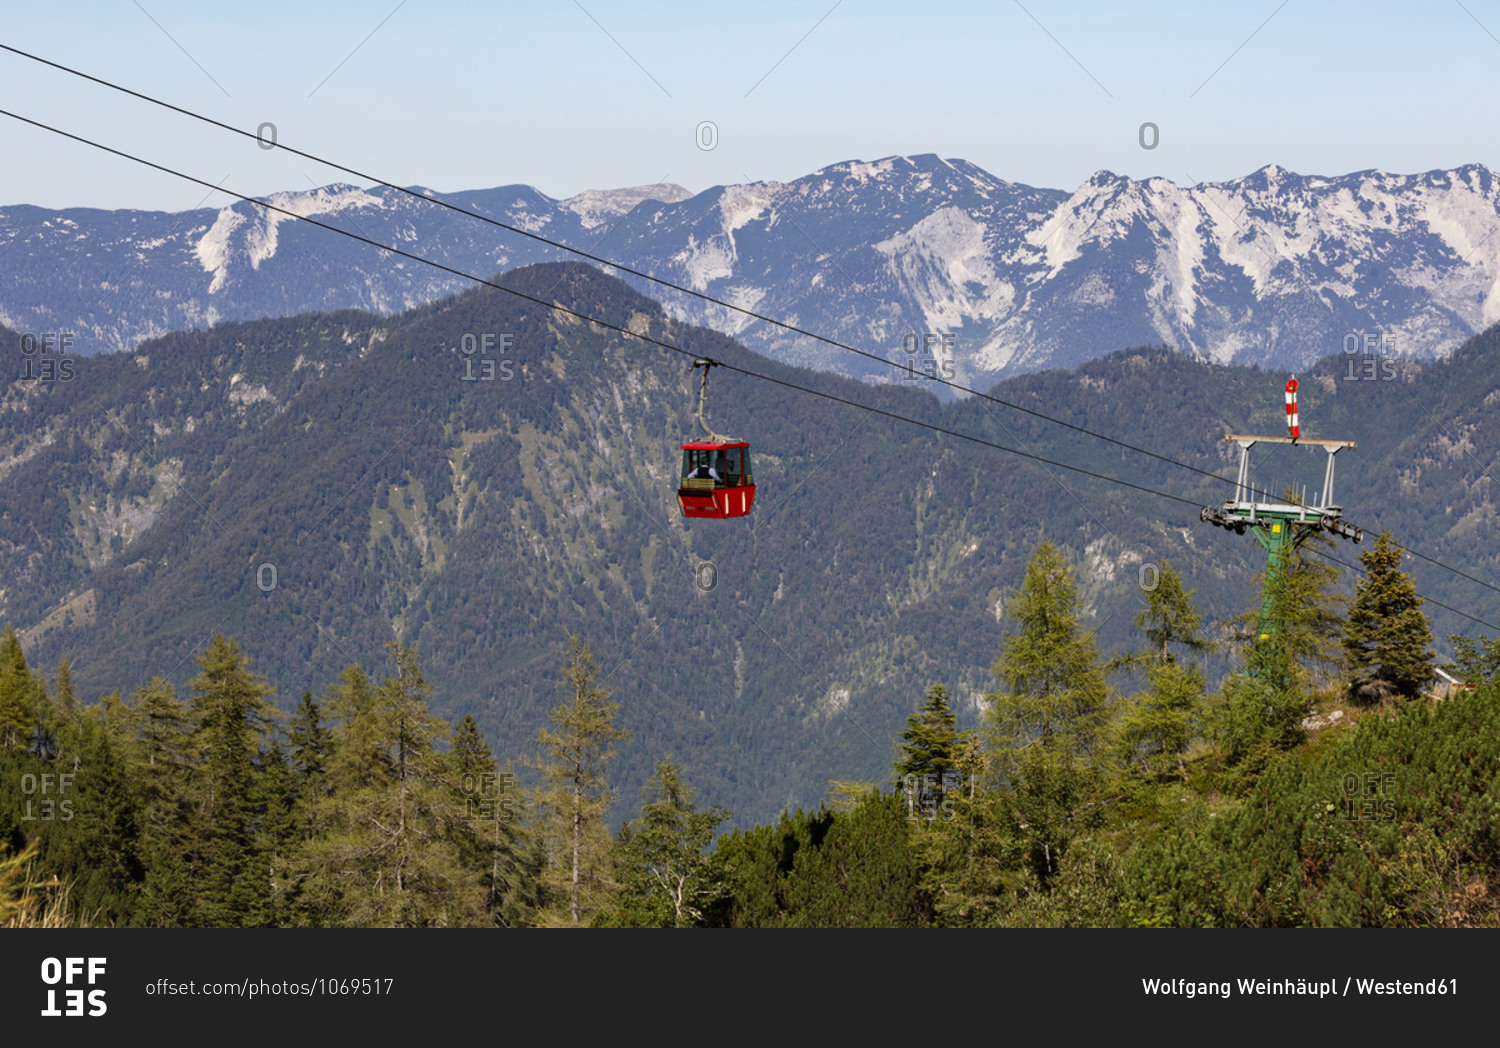 Austria- Upper Austria- Bad Ischl- Overhead cable car moving over forested mountain valley